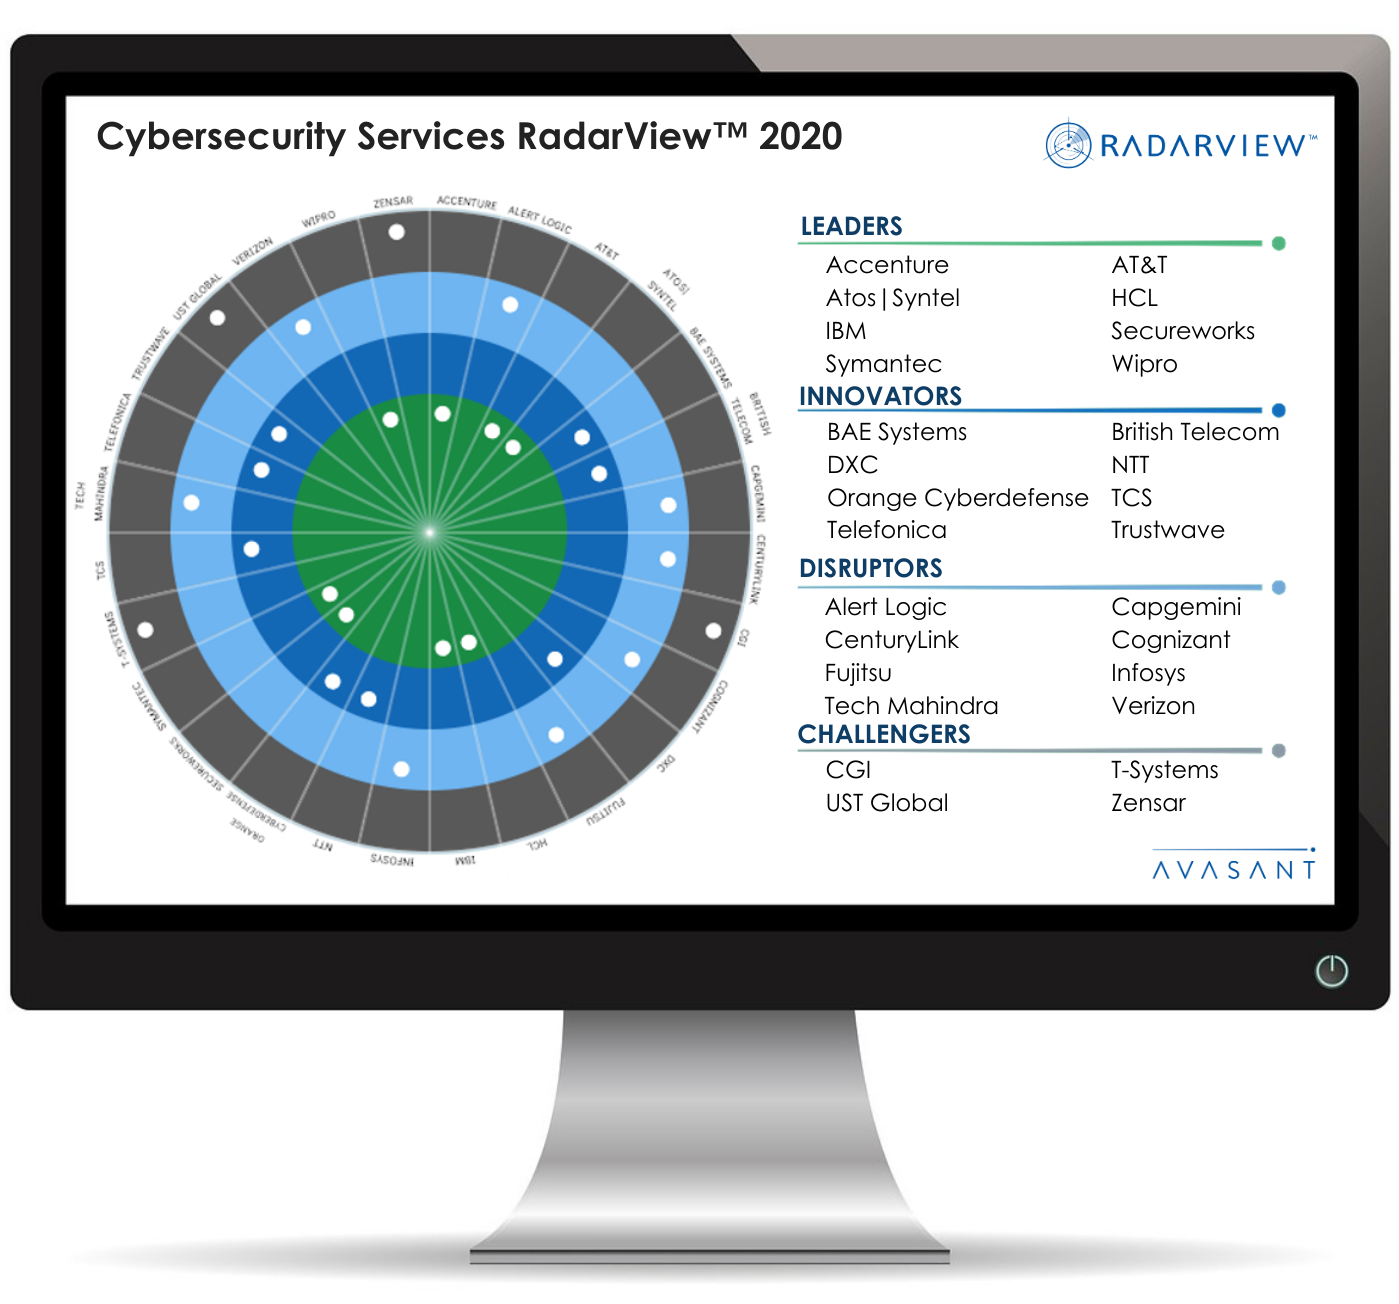 Cybersecurity RV 1 1 - Cybersecurity Services RadarView™ 2020 - CenturyLink